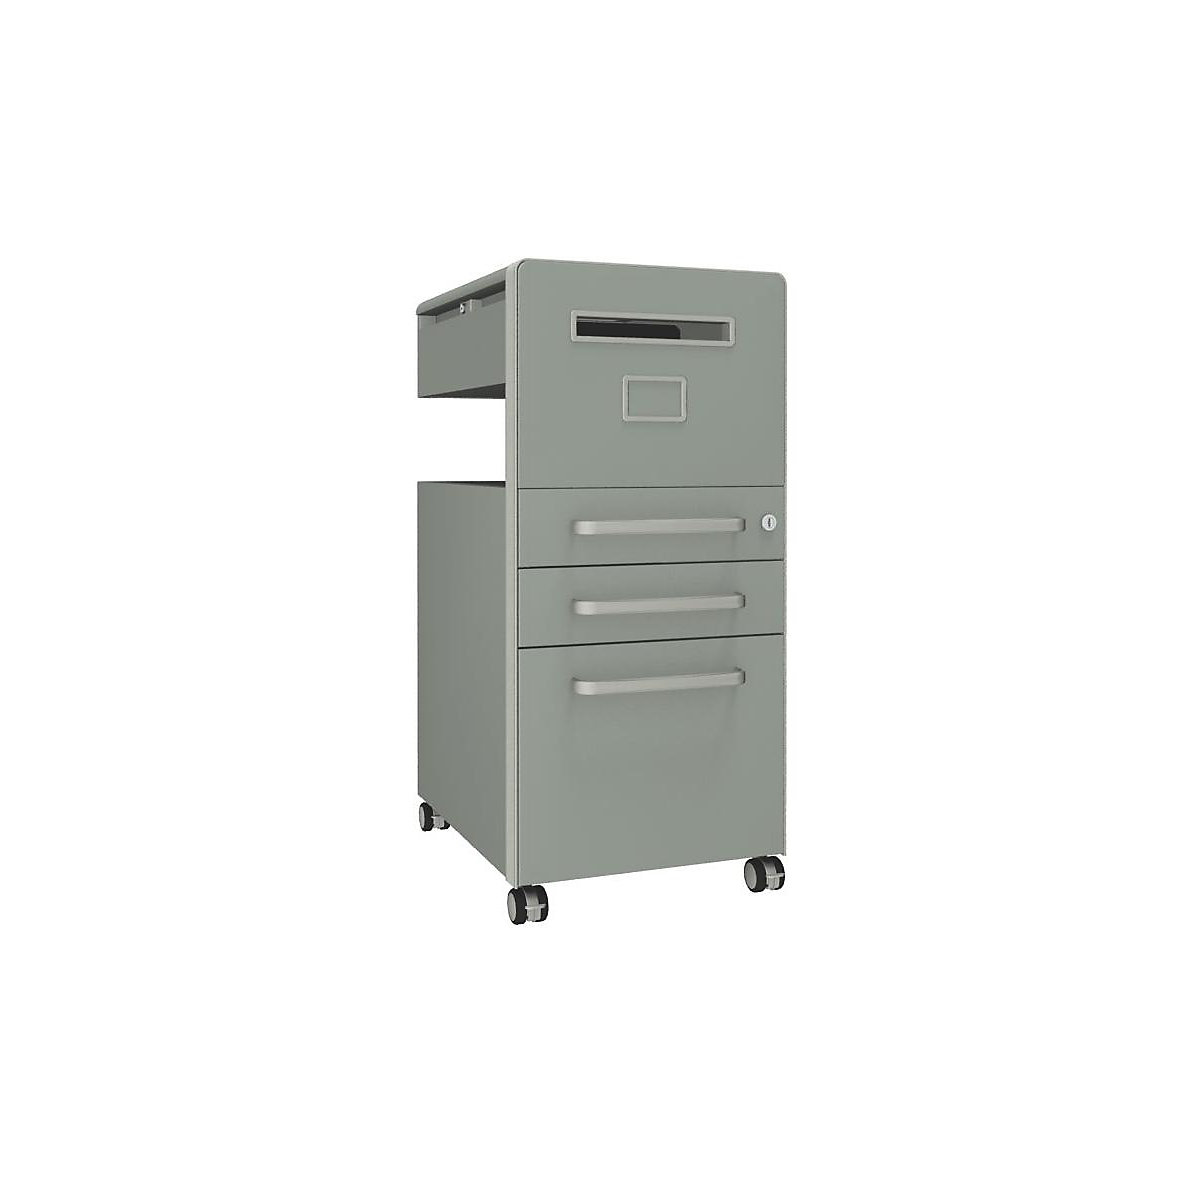 Bite™ pedestal furniture, with 1 whiteboard, opens on the right side – BISLEY, with 2 universal drawers, 1 suspension file drawer, york-27